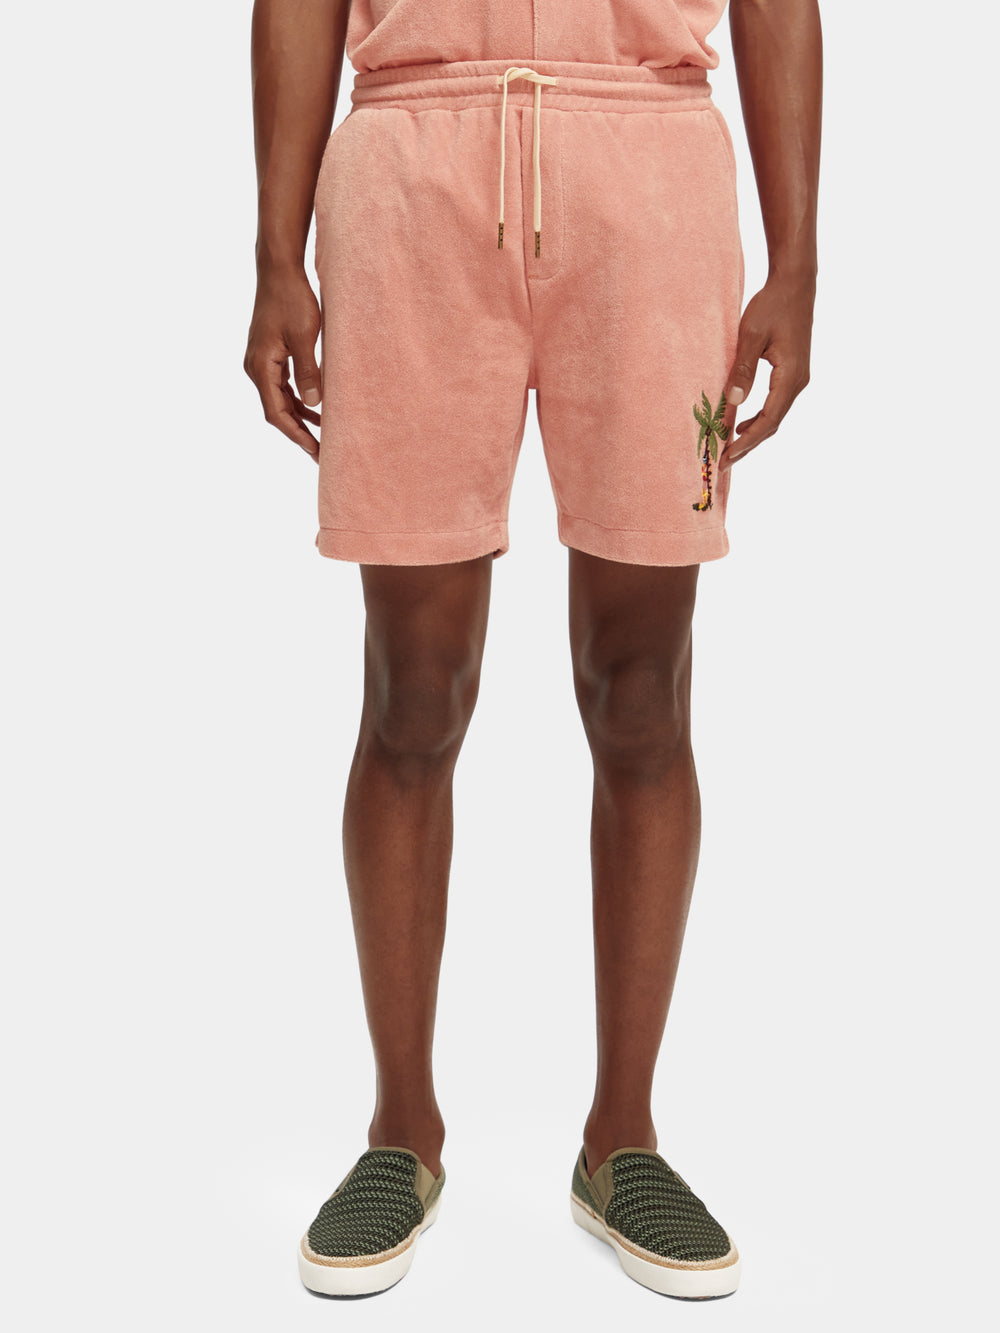 Toweling Bermuda shorts with embroidery - Scotch & Soda NZ